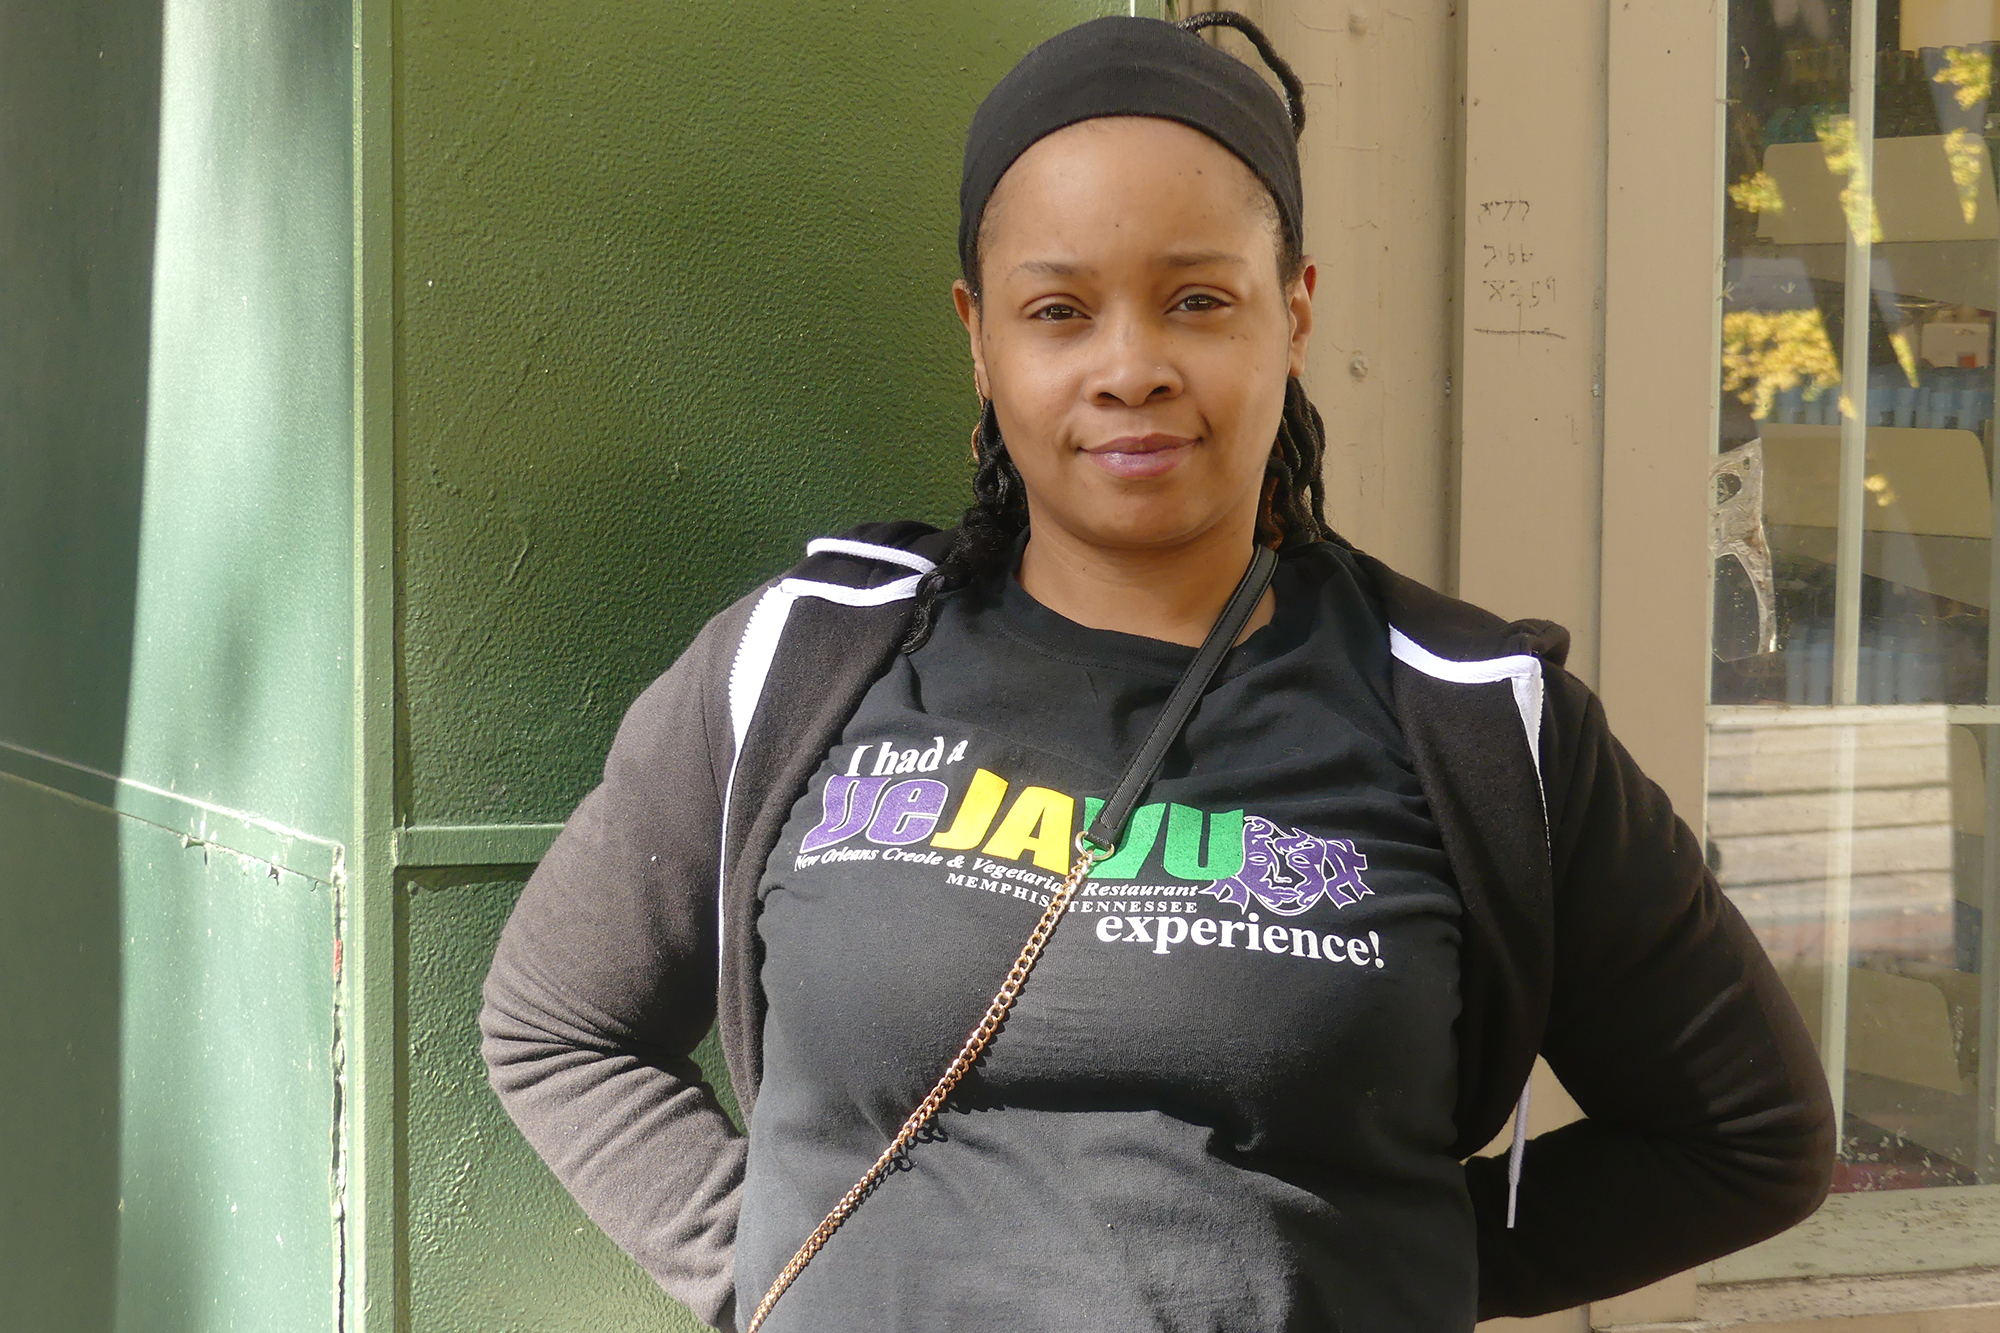 After four years on Main Street in Memphis, Tenn., DejaVu shut its doors in January but announced plans to reopen in a new location this spring. Manager Katrina Bolton said the city's Black Restaurant Week did bring in some new customers.